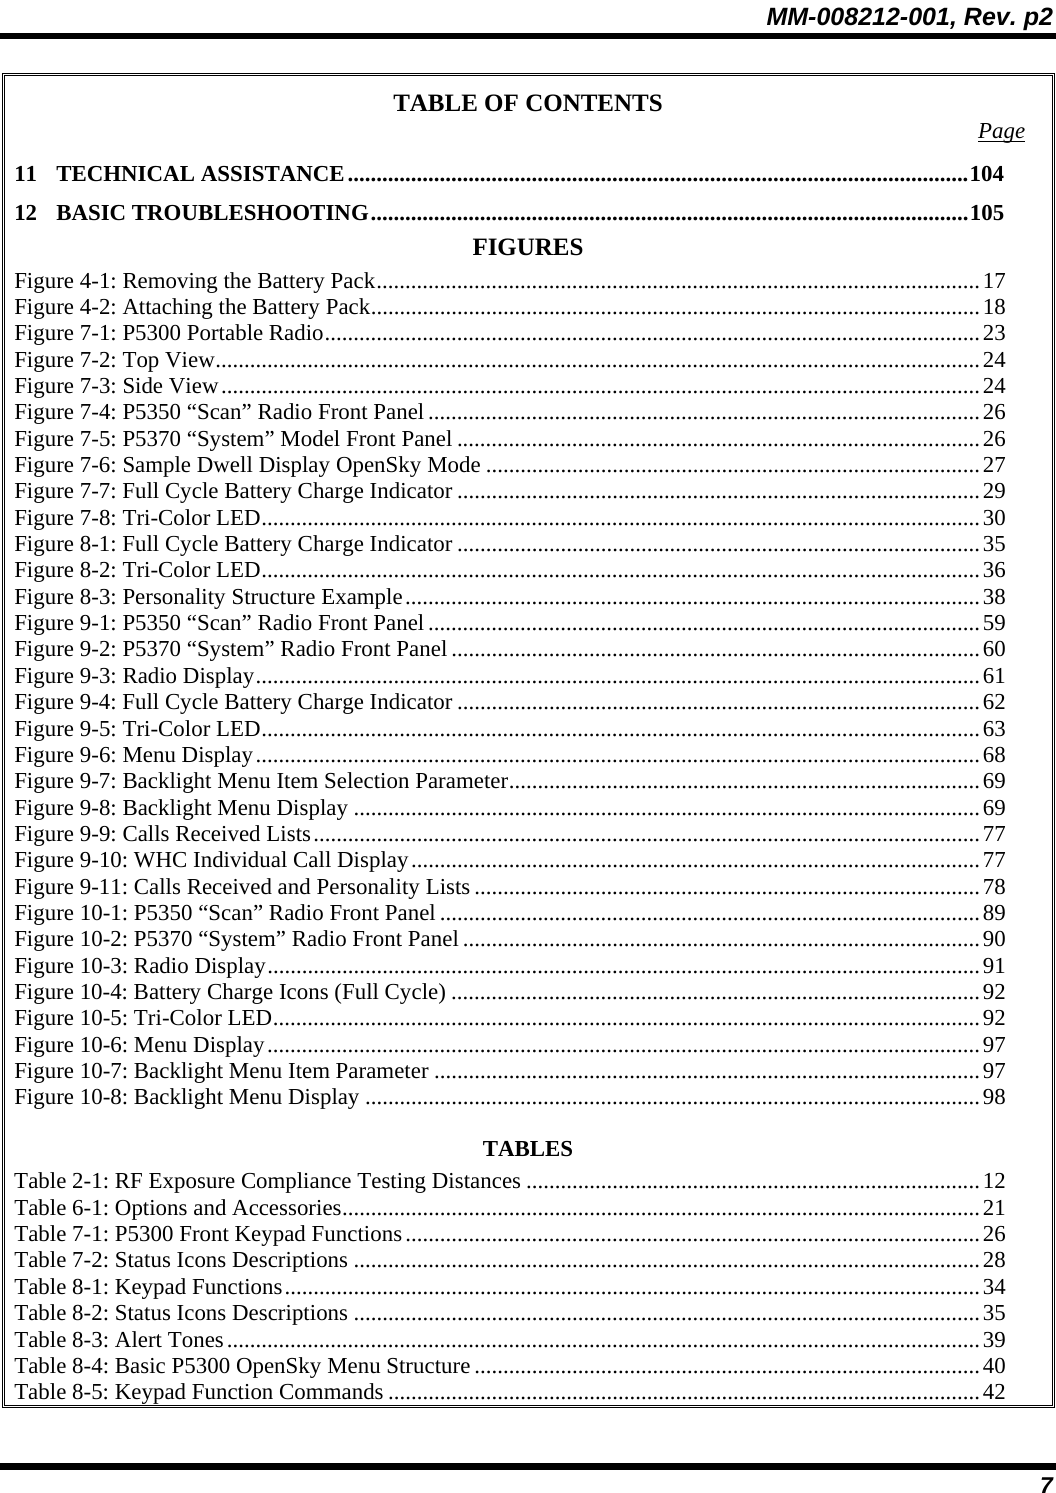 MM-008212-001, Rev. p2 7 TABLE OF CONTENTS  Page 11 TECHNICAL ASSISTANCE............................................................................................................104 12 BASIC TROUBLESHOOTING........................................................................................................105 FIGURES Figure 4-1: Removing the Battery Pack.........................................................................................................17 Figure 4-2: Attaching the Battery Pack..........................................................................................................18 Figure 7-1: P5300 Portable Radio..................................................................................................................23 Figure 7-2: Top View.....................................................................................................................................24 Figure 7-3: Side View....................................................................................................................................24 Figure 7-4: P5350 “Scan” Radio Front Panel................................................................................................26 Figure 7-5: P5370 “System” Model Front Panel ...........................................................................................26 Figure 7-6: Sample Dwell Display OpenSky Mode ......................................................................................27 Figure 7-7: Full Cycle Battery Charge Indicator ...........................................................................................29 Figure 7-8: Tri-Color LED.............................................................................................................................30 Figure 8-1: Full Cycle Battery Charge Indicator ...........................................................................................35 Figure 8-2: Tri-Color LED.............................................................................................................................36 Figure 8-3: Personality Structure Example....................................................................................................38 Figure 9-1: P5350 “Scan” Radio Front Panel................................................................................................59 Figure 9-2: P5370 “System” Radio Front Panel ............................................................................................60 Figure 9-3: Radio Display..............................................................................................................................61 Figure 9-4: Full Cycle Battery Charge Indicator ...........................................................................................62 Figure 9-5: Tri-Color LED.............................................................................................................................63 Figure 9-6: Menu Display..............................................................................................................................68 Figure 9-7: Backlight Menu Item Selection Parameter..................................................................................69 Figure 9-8: Backlight Menu Display .............................................................................................................69 Figure 9-9: Calls Received Lists....................................................................................................................77 Figure 9-10: WHC Individual Call Display...................................................................................................77 Figure 9-11: Calls Received and Personality Lists ........................................................................................78 Figure 10-1: P5350 “Scan” Radio Front Panel ..............................................................................................89 Figure 10-2: P5370 “System” Radio Front Panel ..........................................................................................90 Figure 10-3: Radio Display............................................................................................................................91 Figure 10-4: Battery Charge Icons (Full Cycle) ............................................................................................92 Figure 10-5: Tri-Color LED...........................................................................................................................92 Figure 10-6: Menu Display............................................................................................................................97 Figure 10-7: Backlight Menu Item Parameter ...............................................................................................97 Figure 10-8: Backlight Menu Display ...........................................................................................................98 TABLES Table 2-1: RF Exposure Compliance Testing Distances ...............................................................................12 Table 6-1: Options and Accessories...............................................................................................................21 Table 7-1: P5300 Front Keypad Functions....................................................................................................26 Table 7-2: Status Icons Descriptions .............................................................................................................28 Table 8-1: Keypad Functions.........................................................................................................................34 Table 8-2: Status Icons Descriptions .............................................................................................................35 Table 8-3: Alert Tones...................................................................................................................................39 Table 8-4: Basic P5300 OpenSky Menu Structure ........................................................................................40 Table 8-5: Keypad Function Commands .......................................................................................................42 